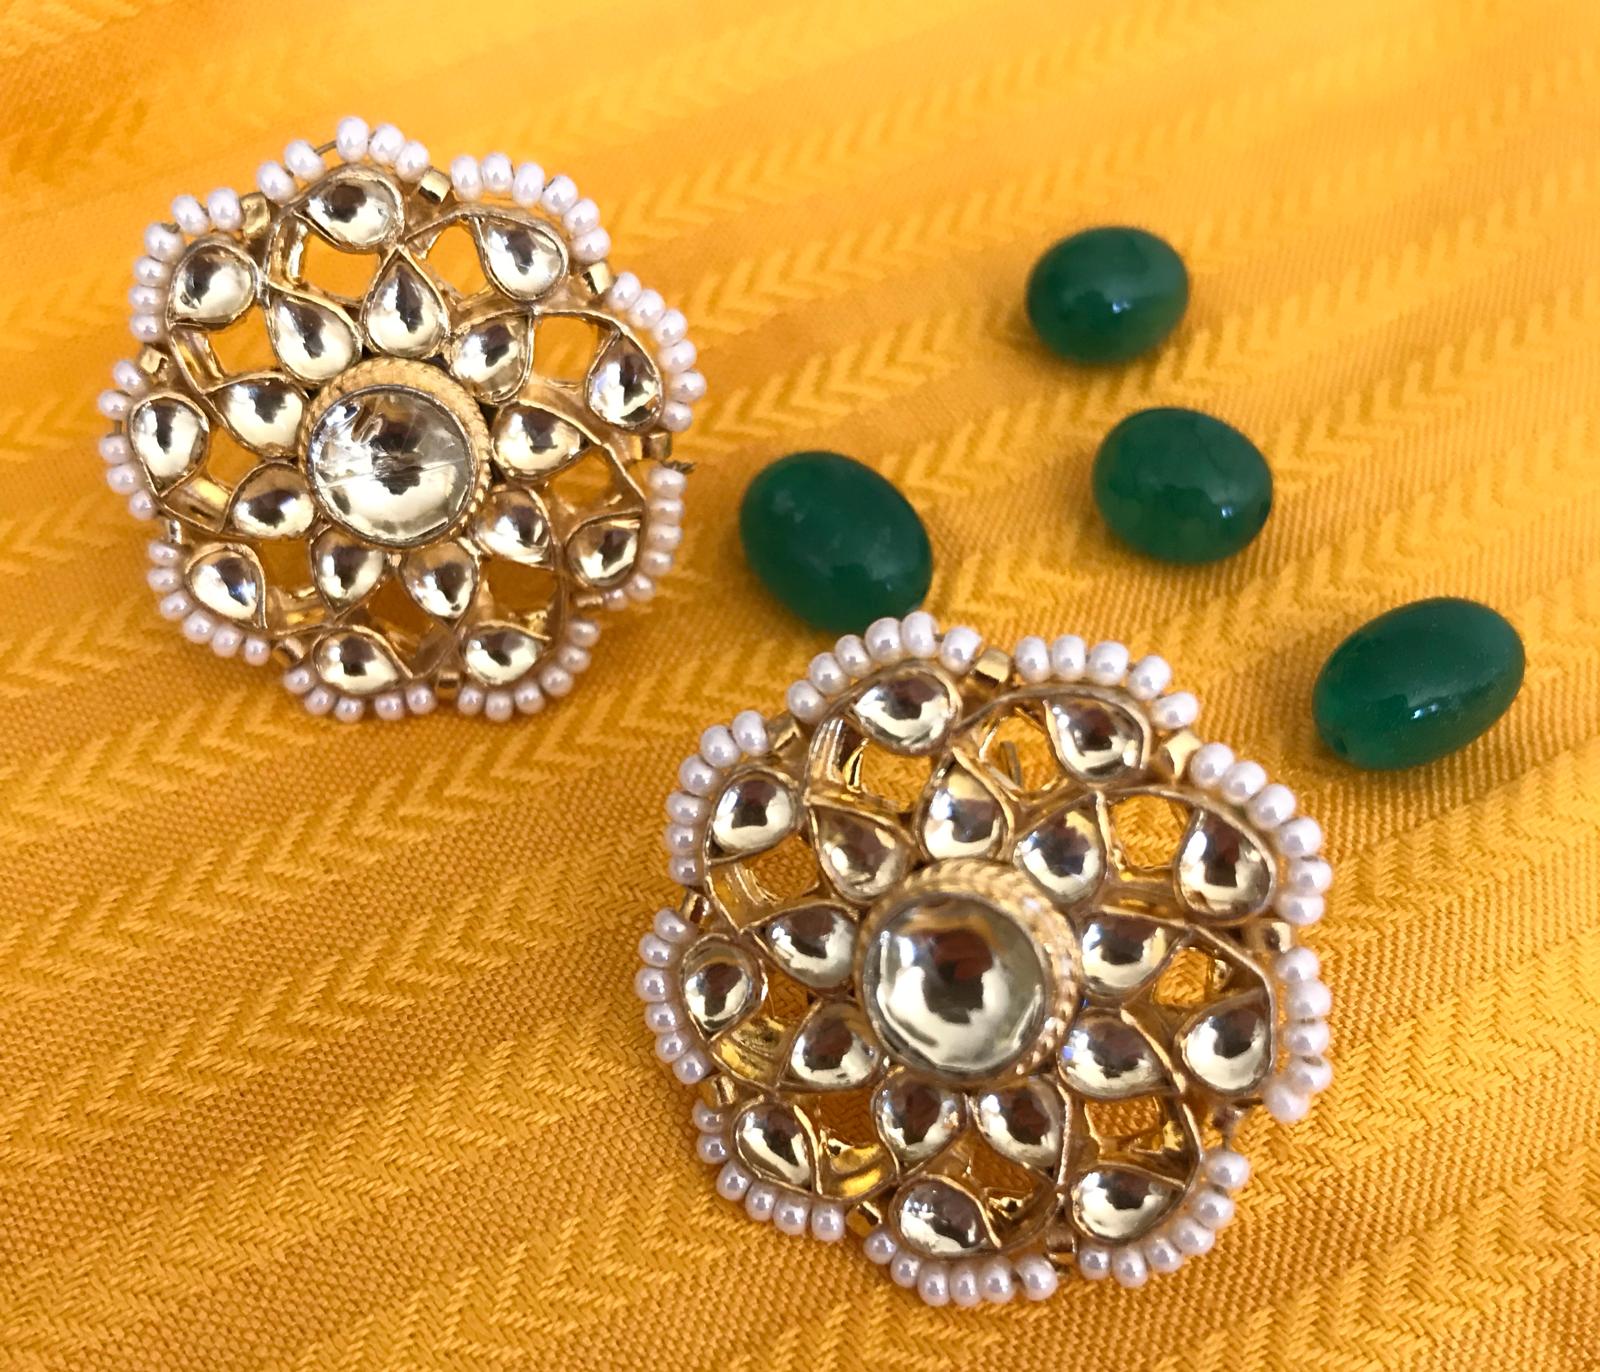 Unique Round Shaped Gold Colored Pearl Earrings